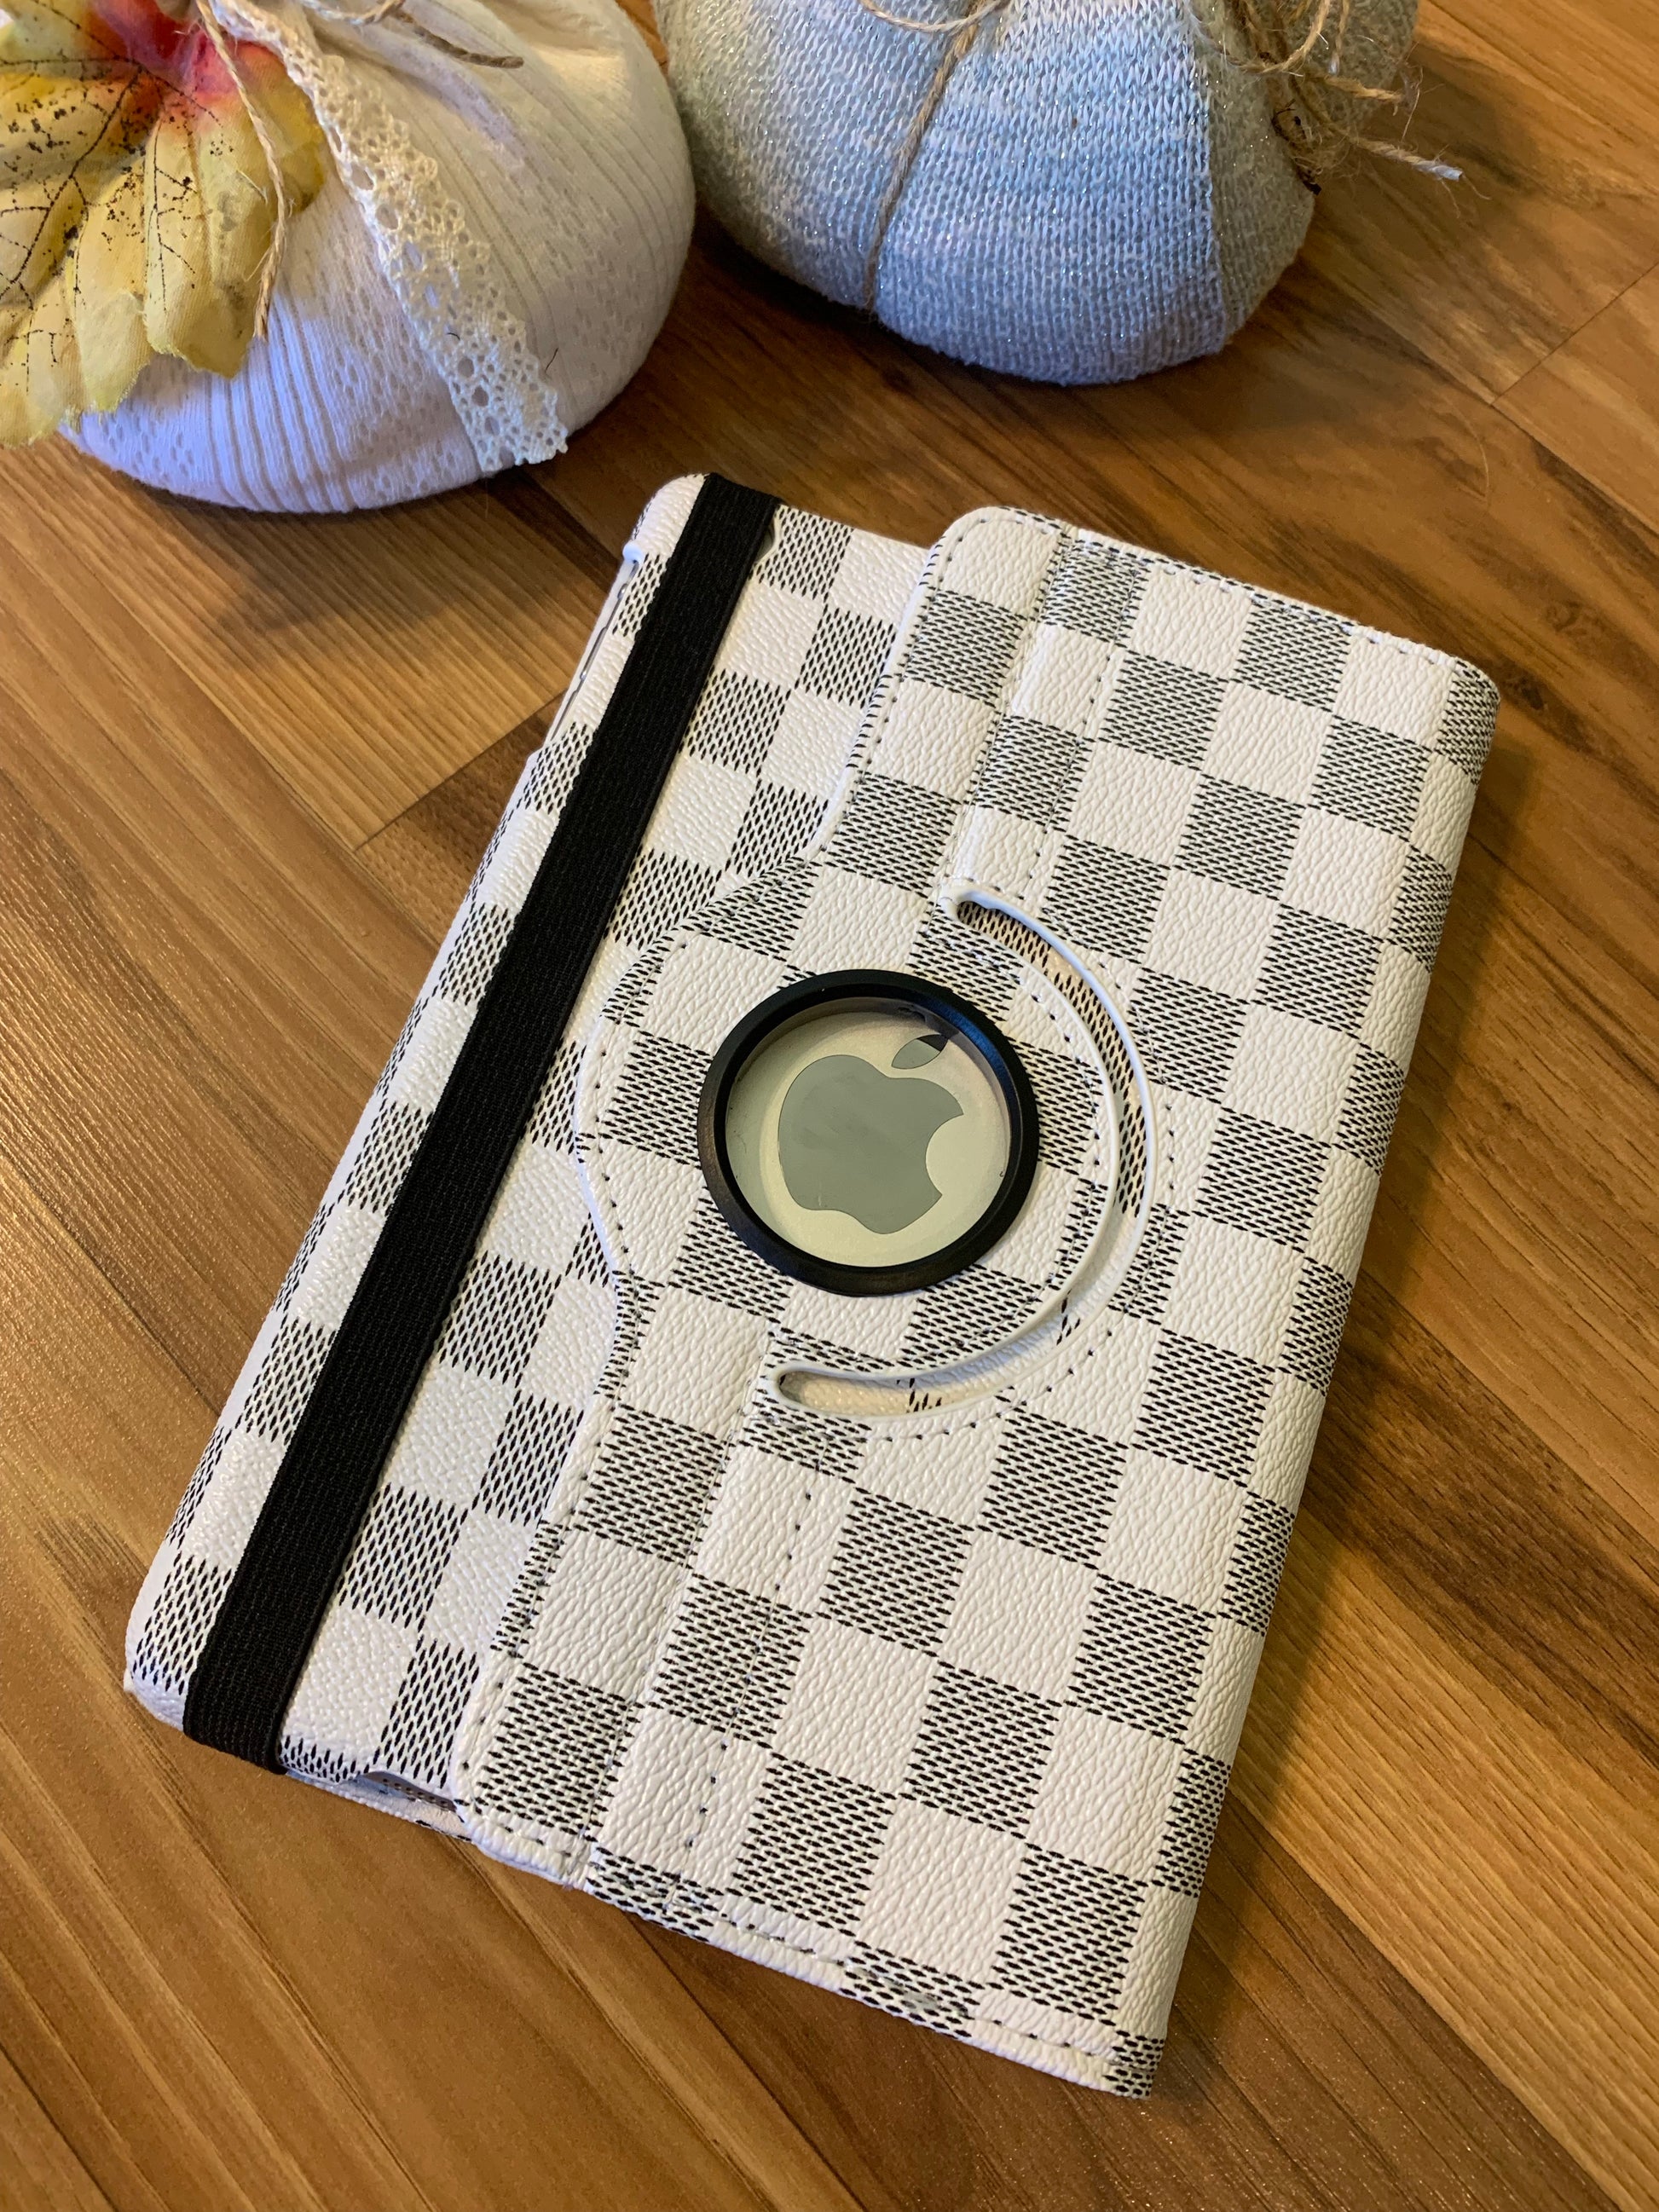 { Apple ipad mini case holder } Plaid check designer inspired. Rotated so  you can prop up for easy viewing. 7.9 inch. 3 colors!